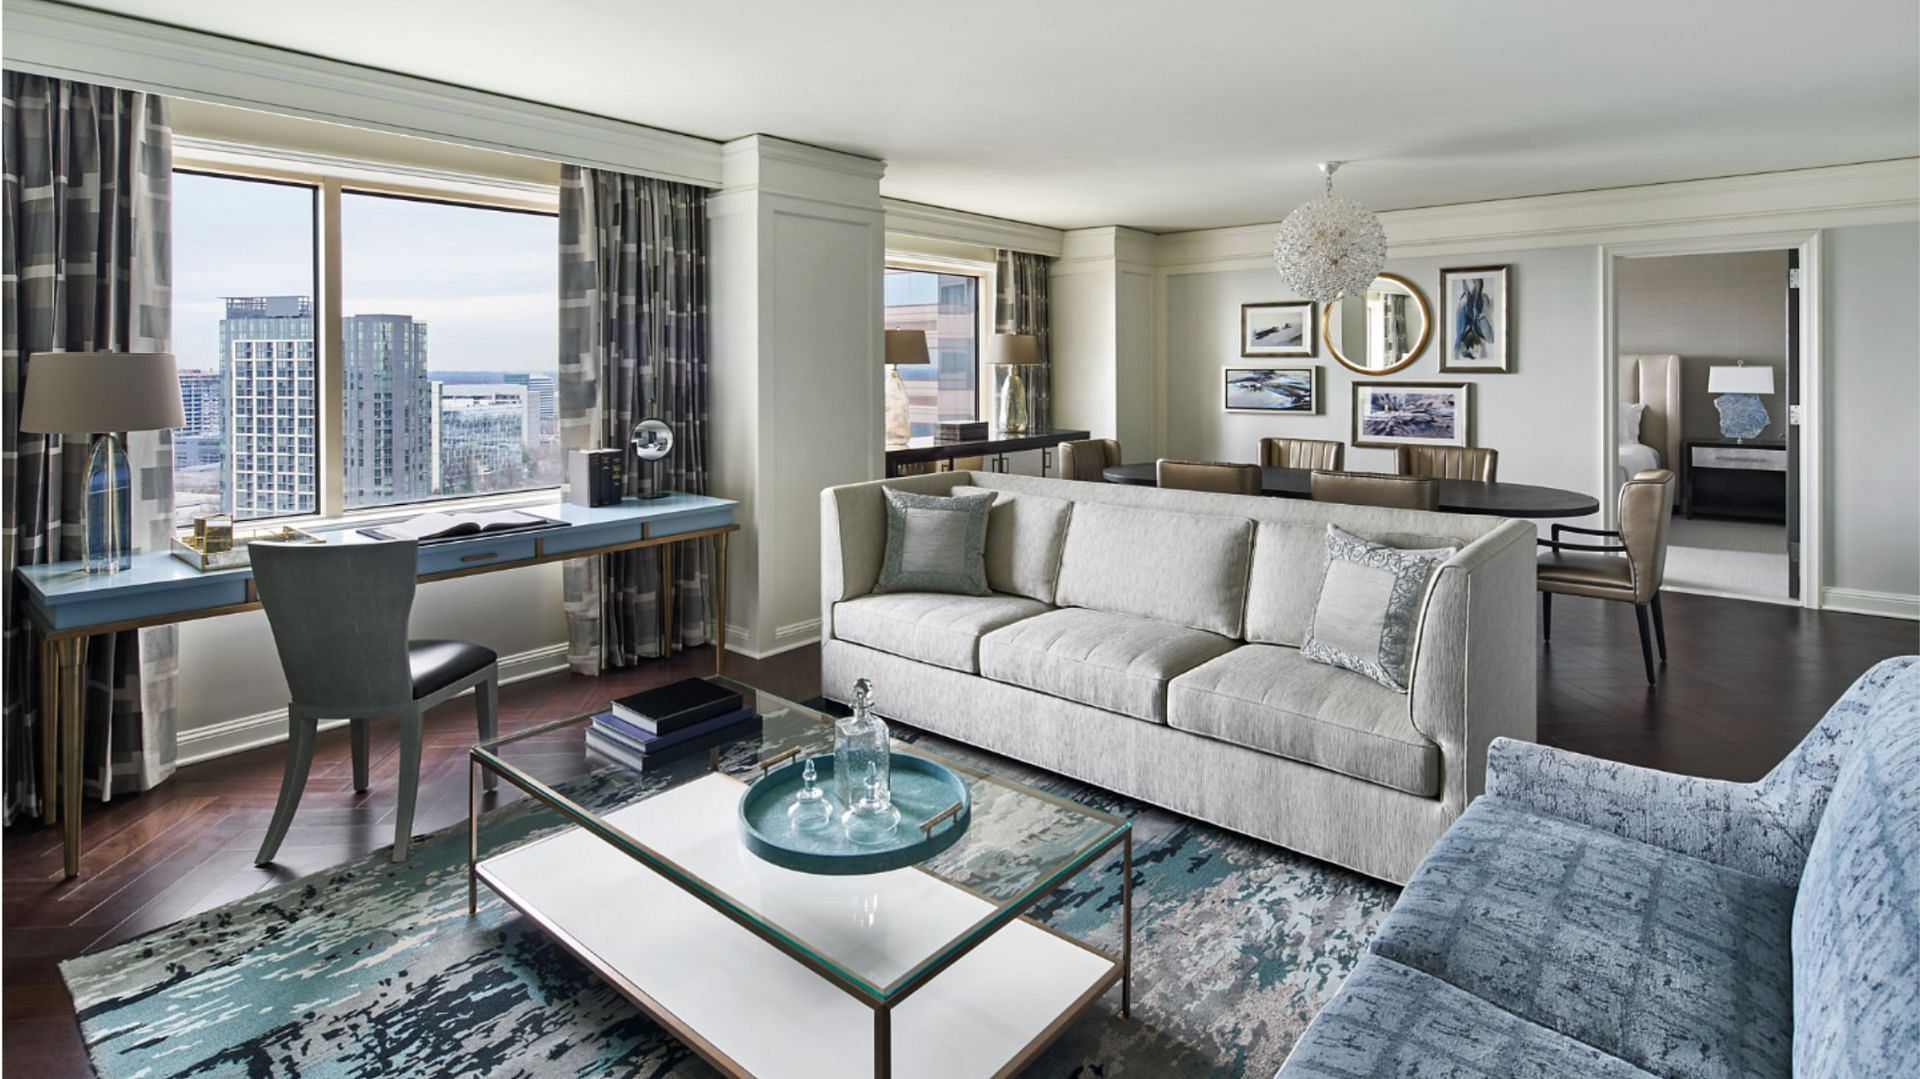 A suite at the hotel. (Image via Ritz Carlton)